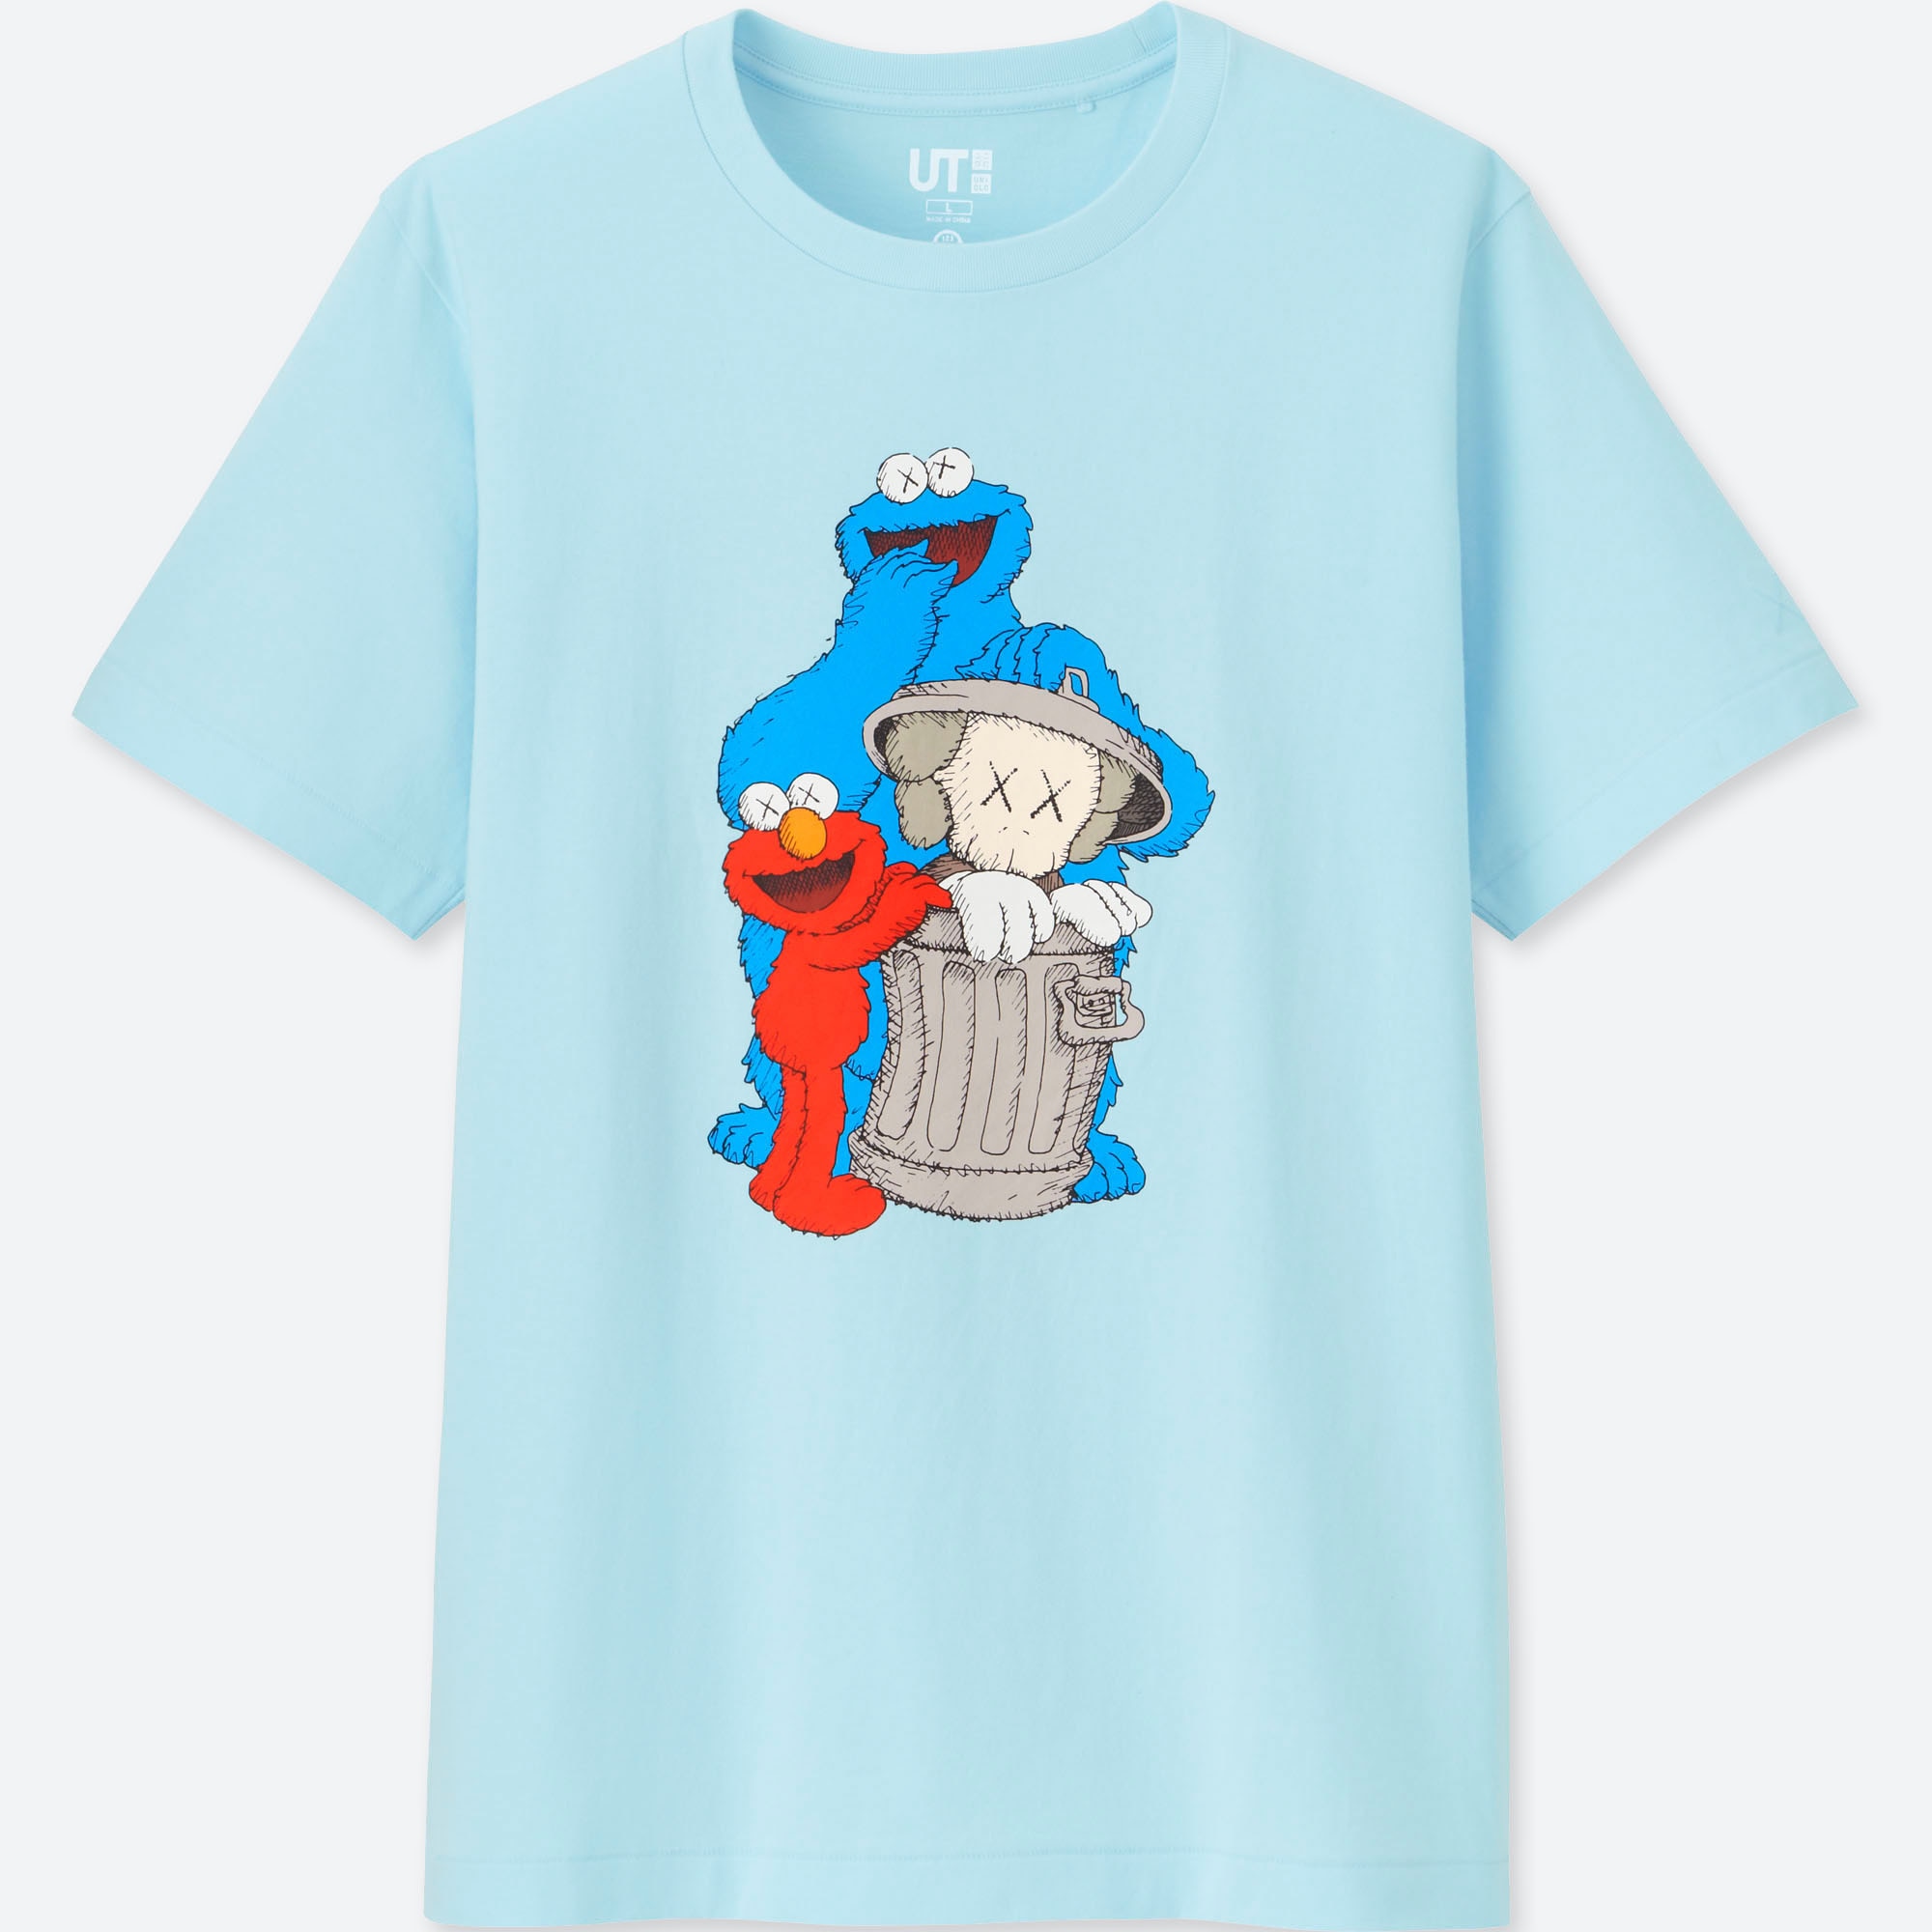 KAWS SUMMER graphic tees and totes are here  UNIQLO TODAY  UNIQLO US